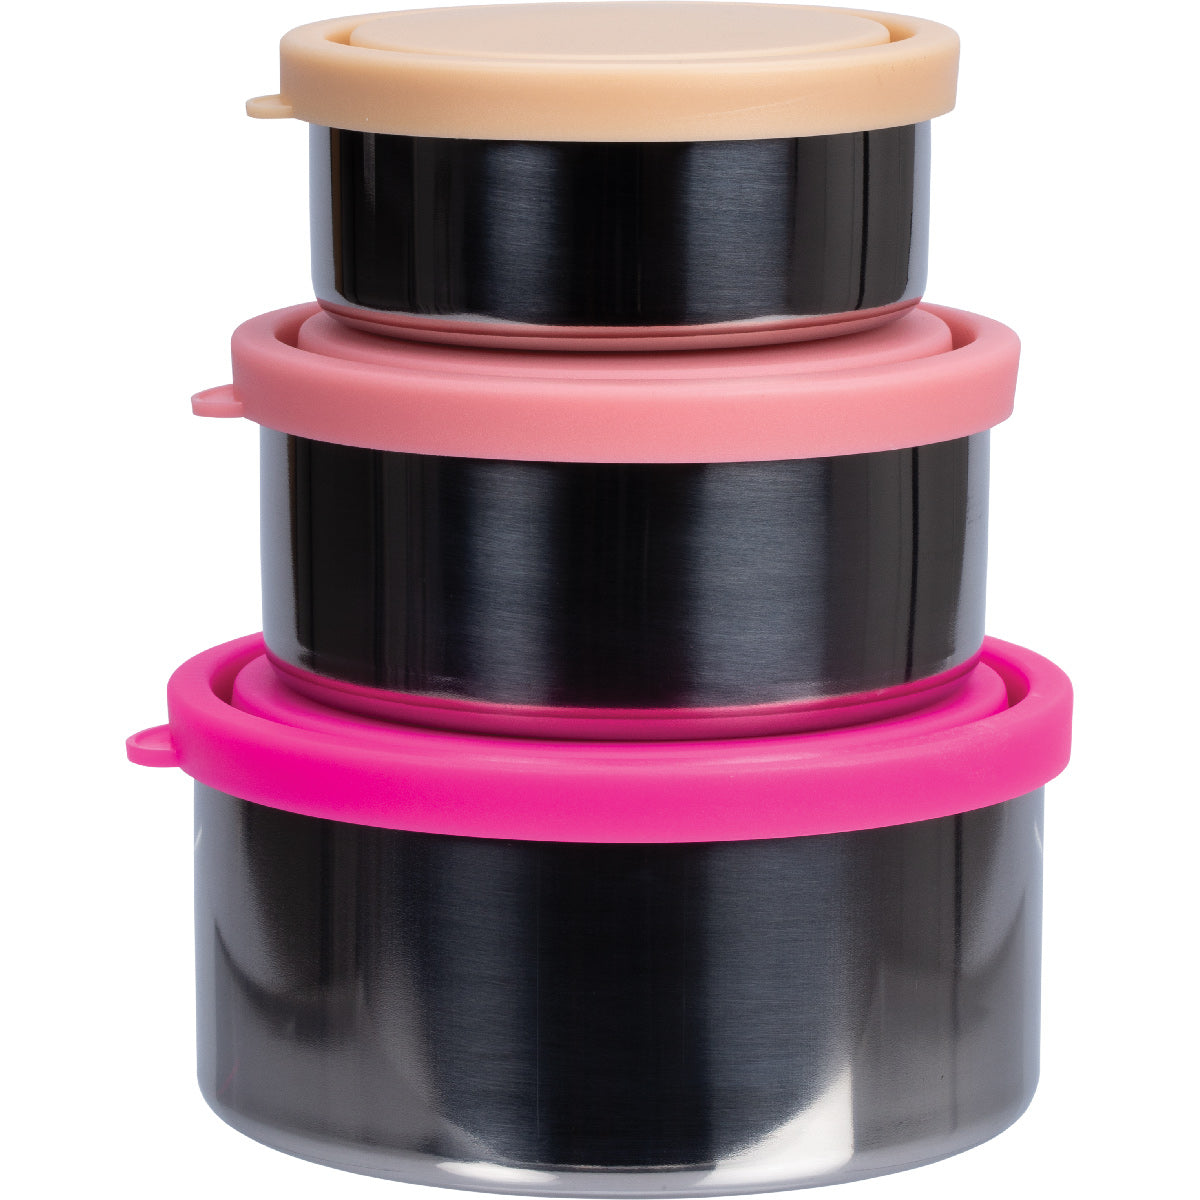 Ever Eco Round Nesting Containers Rise Collection - 3 Piece Set